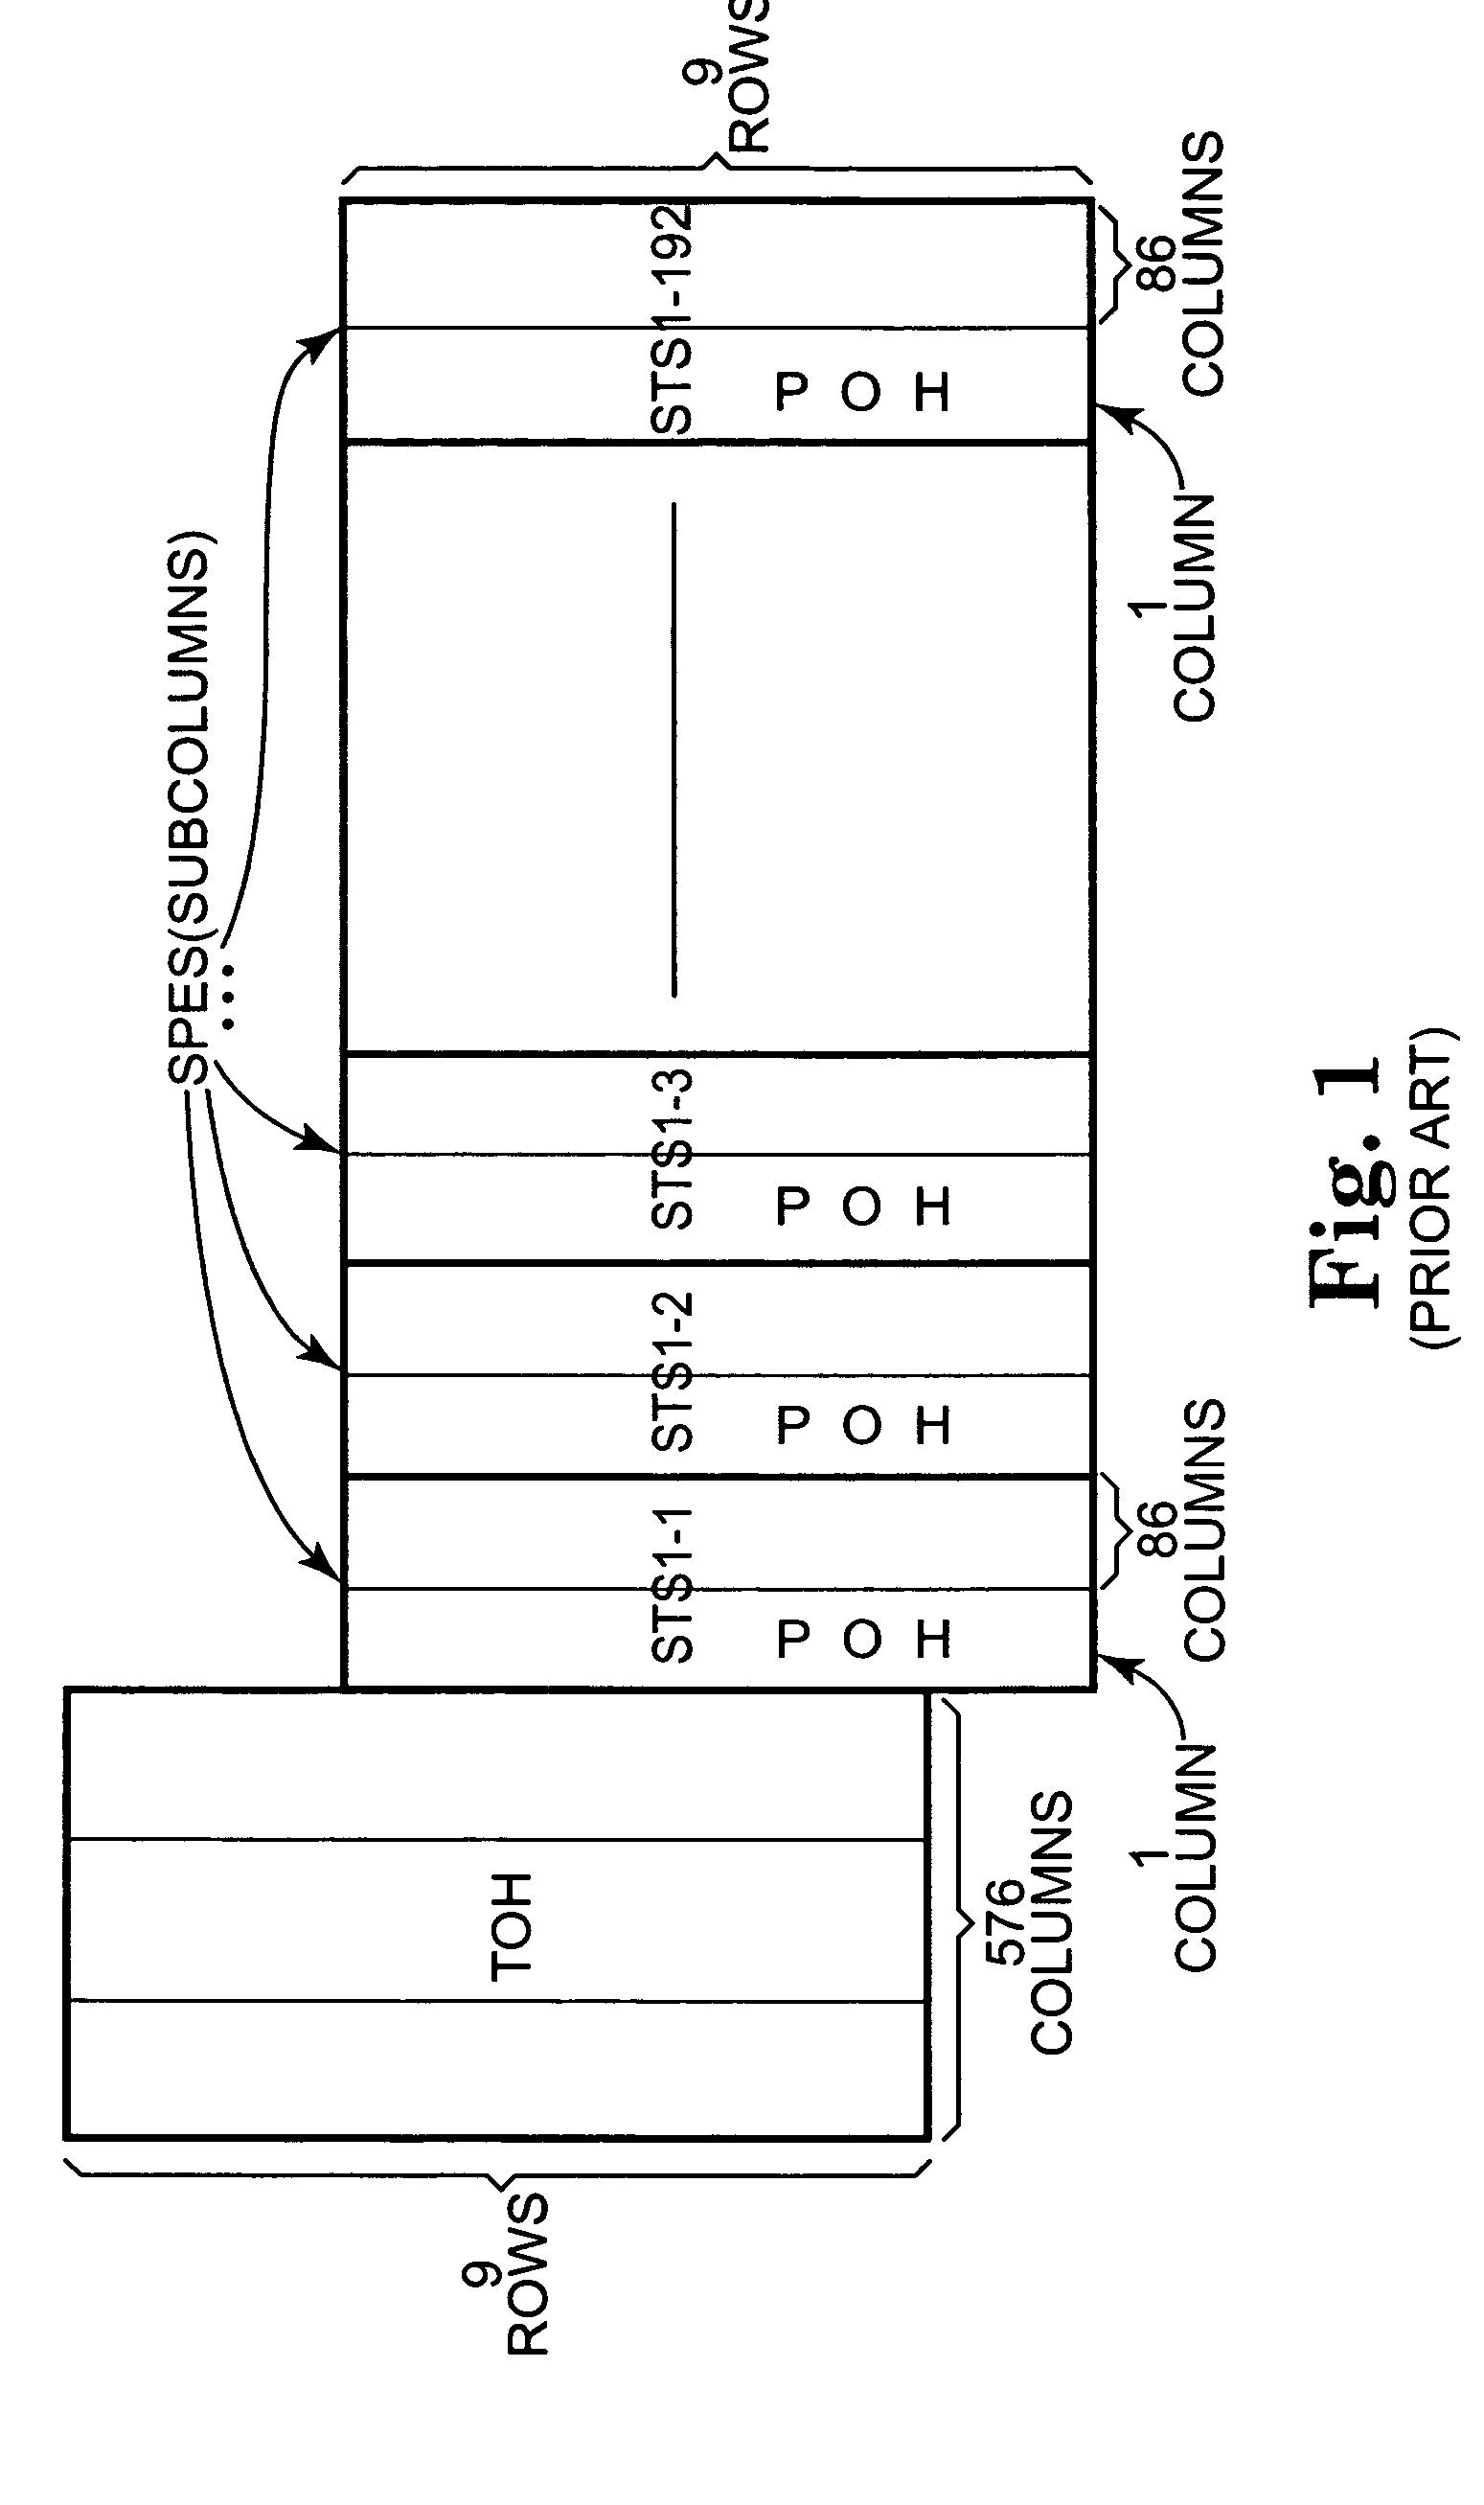 Virtual concatenation receiver processing with memory addressing scheme to avoid delays at address scatter points